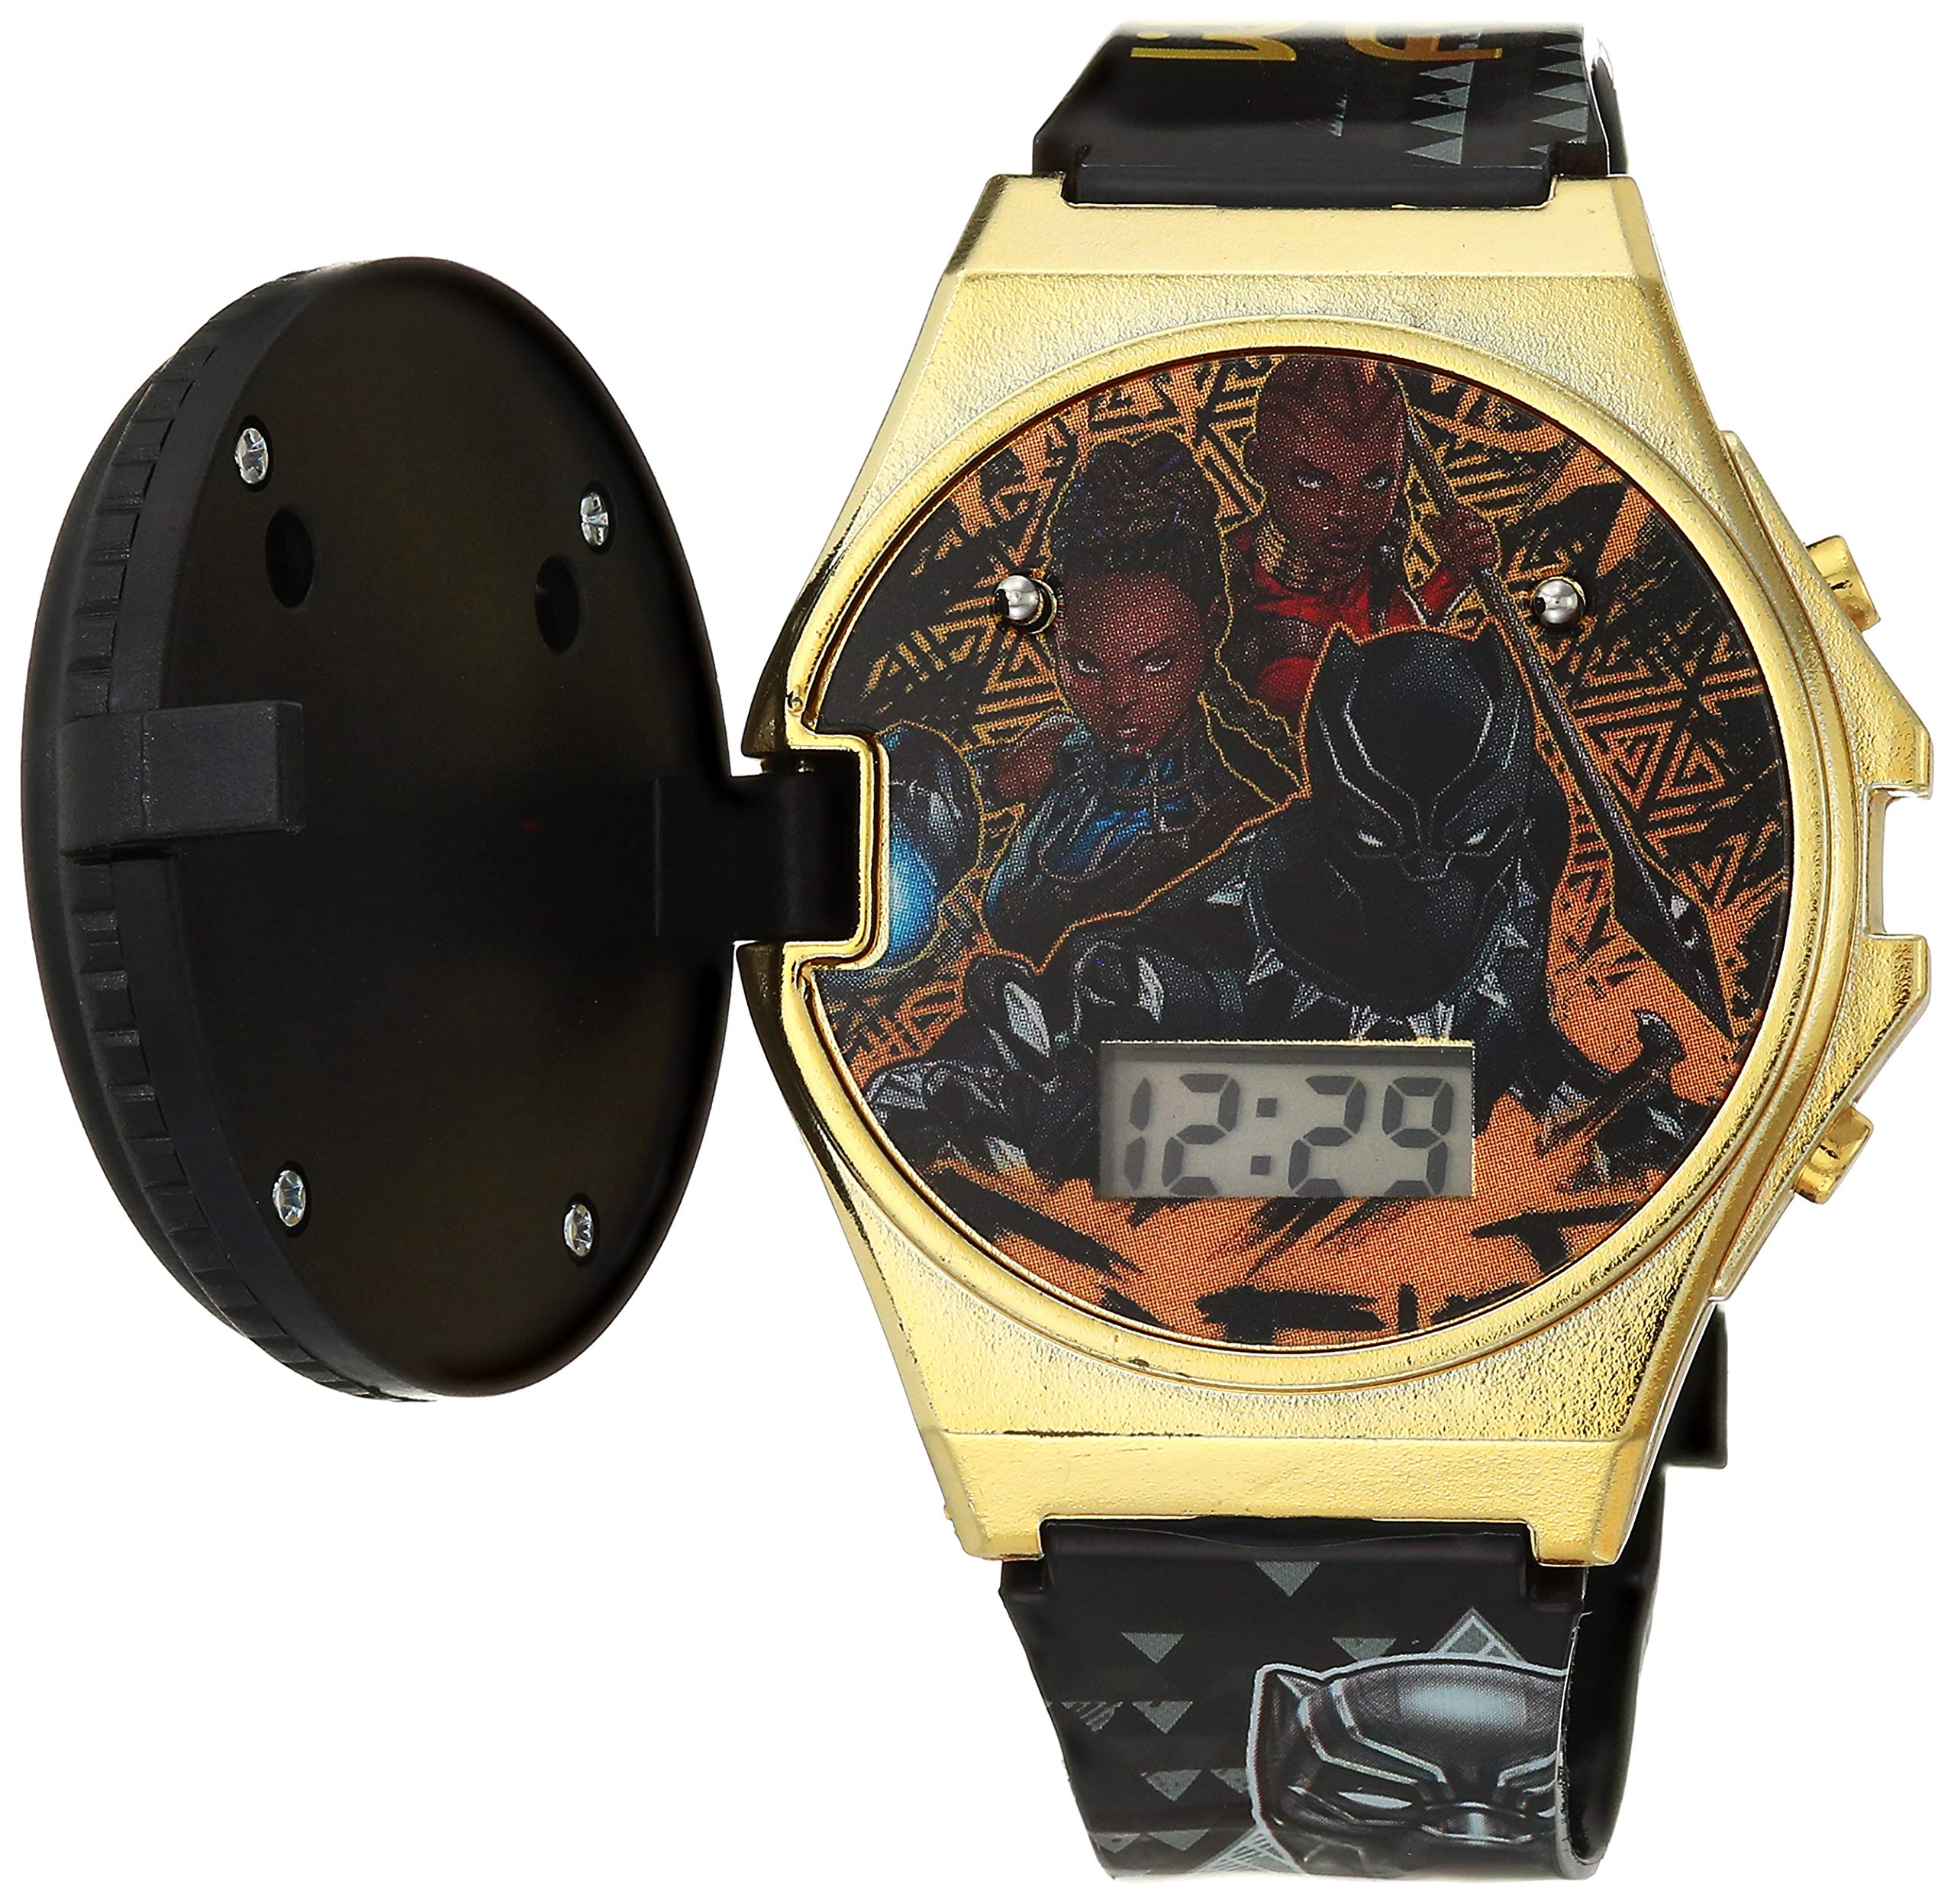 Marvel Avengers Black Panther Kids's Flashing POP TOP Digital Watch with Character Details (Model: AVG4621AZ)